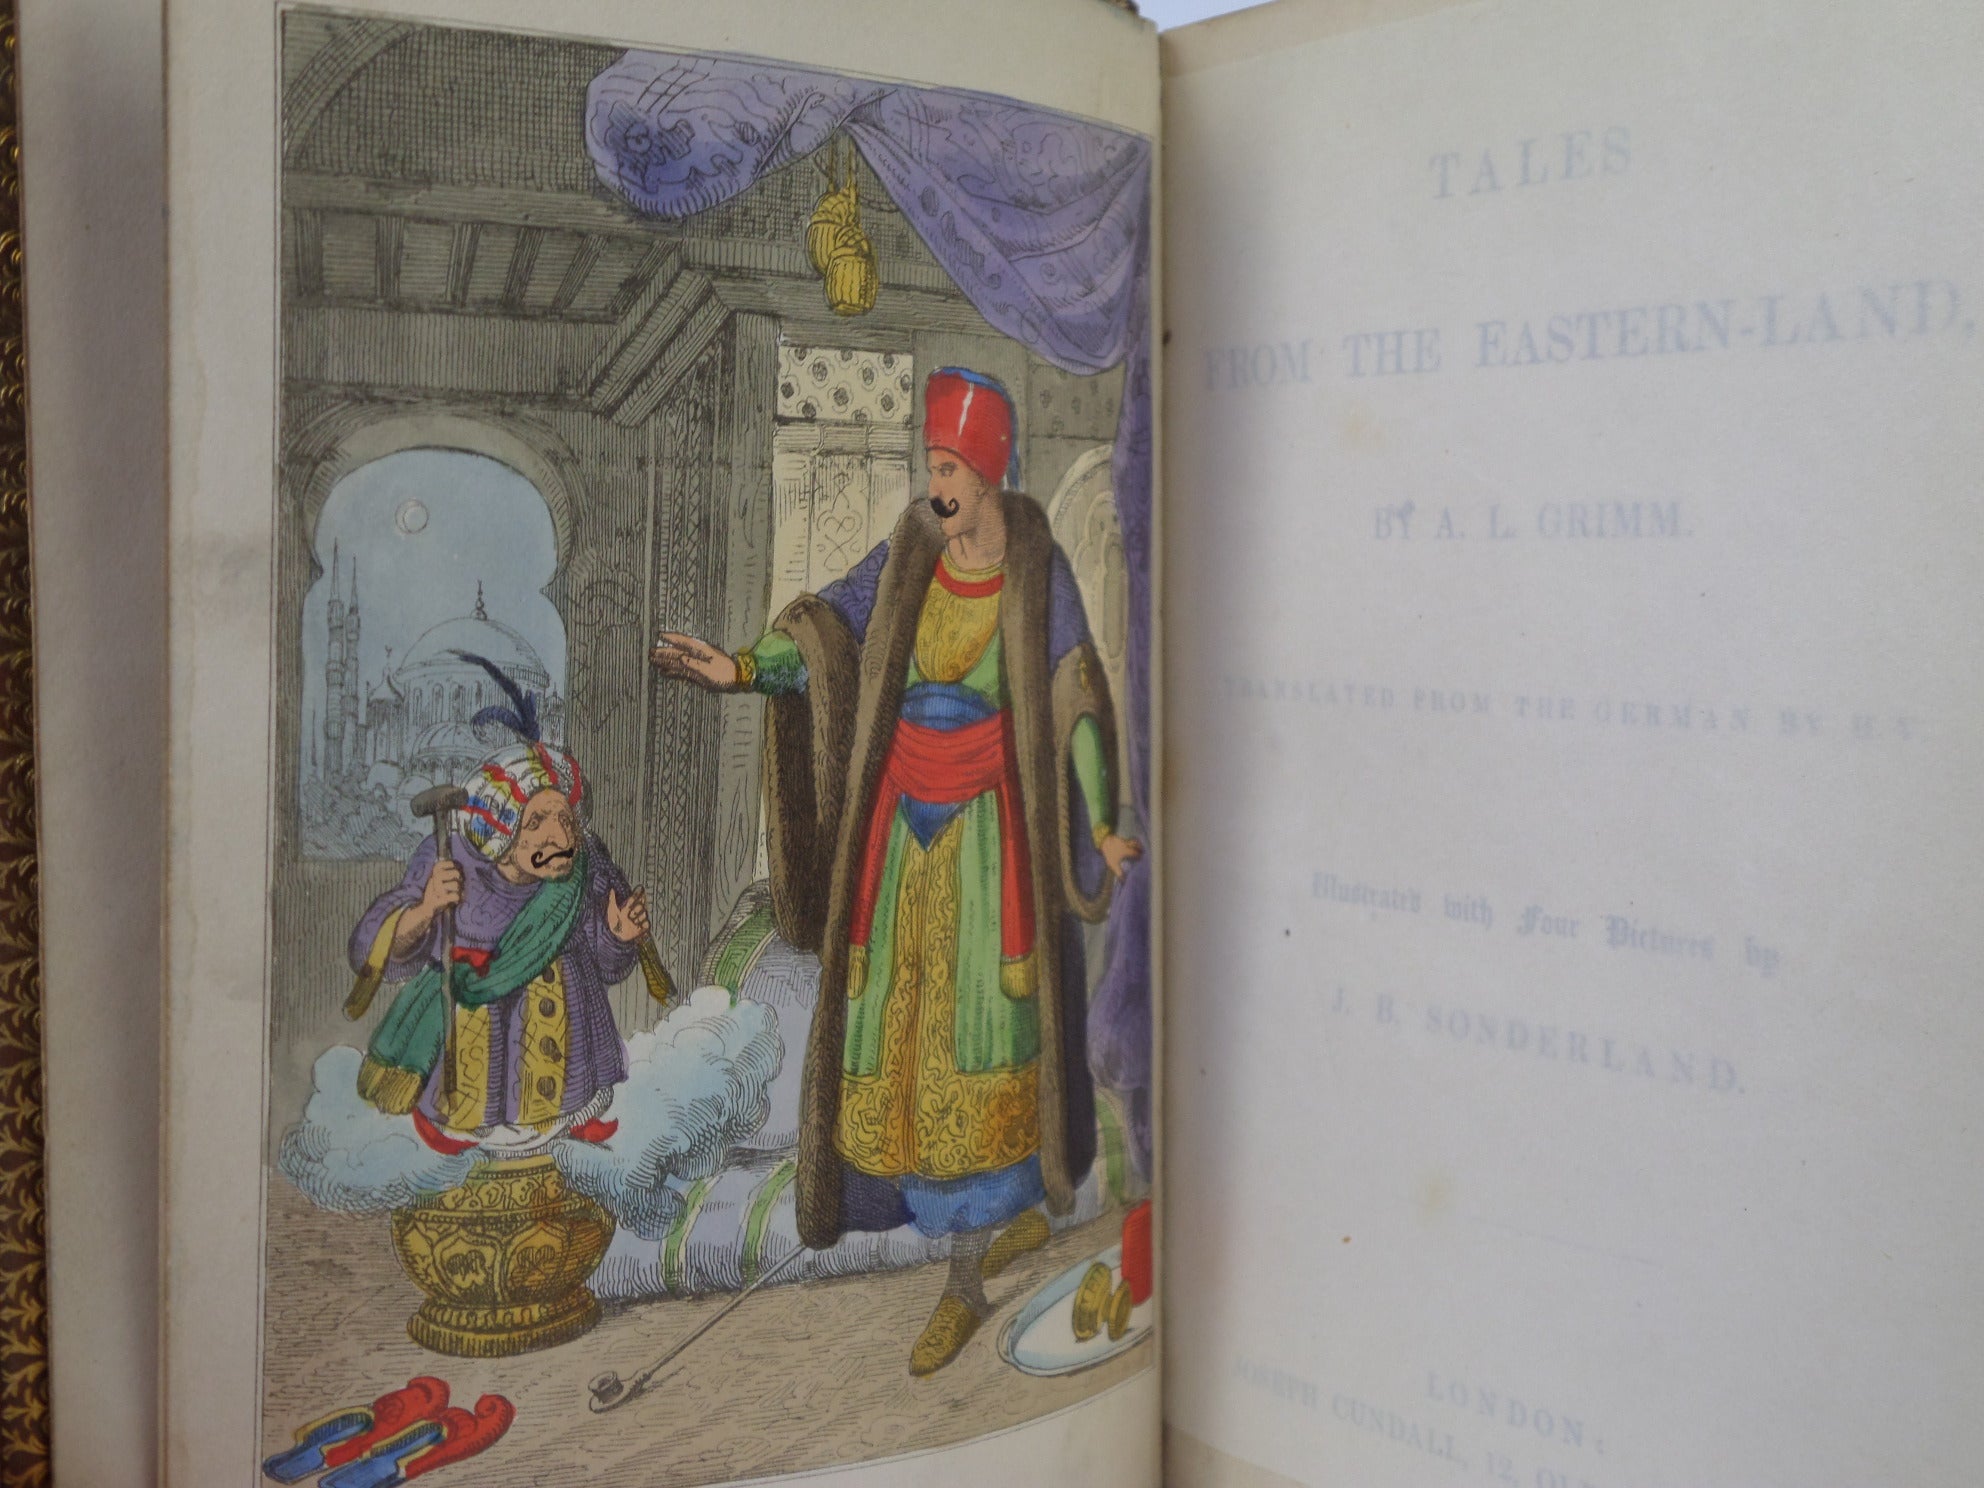 TALES FROM THE EASTERN-LAND BY ALBERT LUDWIG GRIMM 1847 LEATHER BINDING